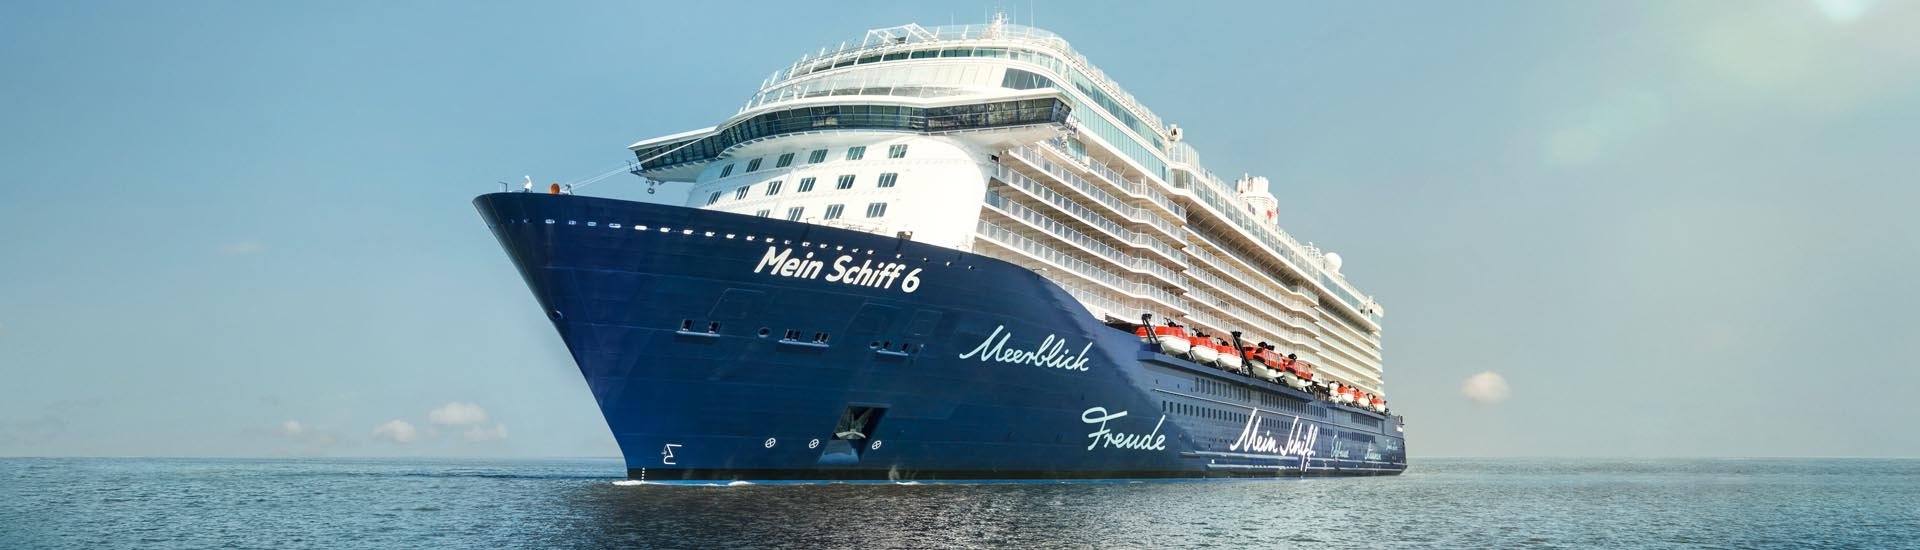 https://images.dreamlines.de/Ug7H-ZpSdy1rfpyNlPzoeHYalrs=/80x23/smart/pims/29eb4f44c5c3b12e4bb98693bf0262c1/meinschiff6_cropped_02.jpg